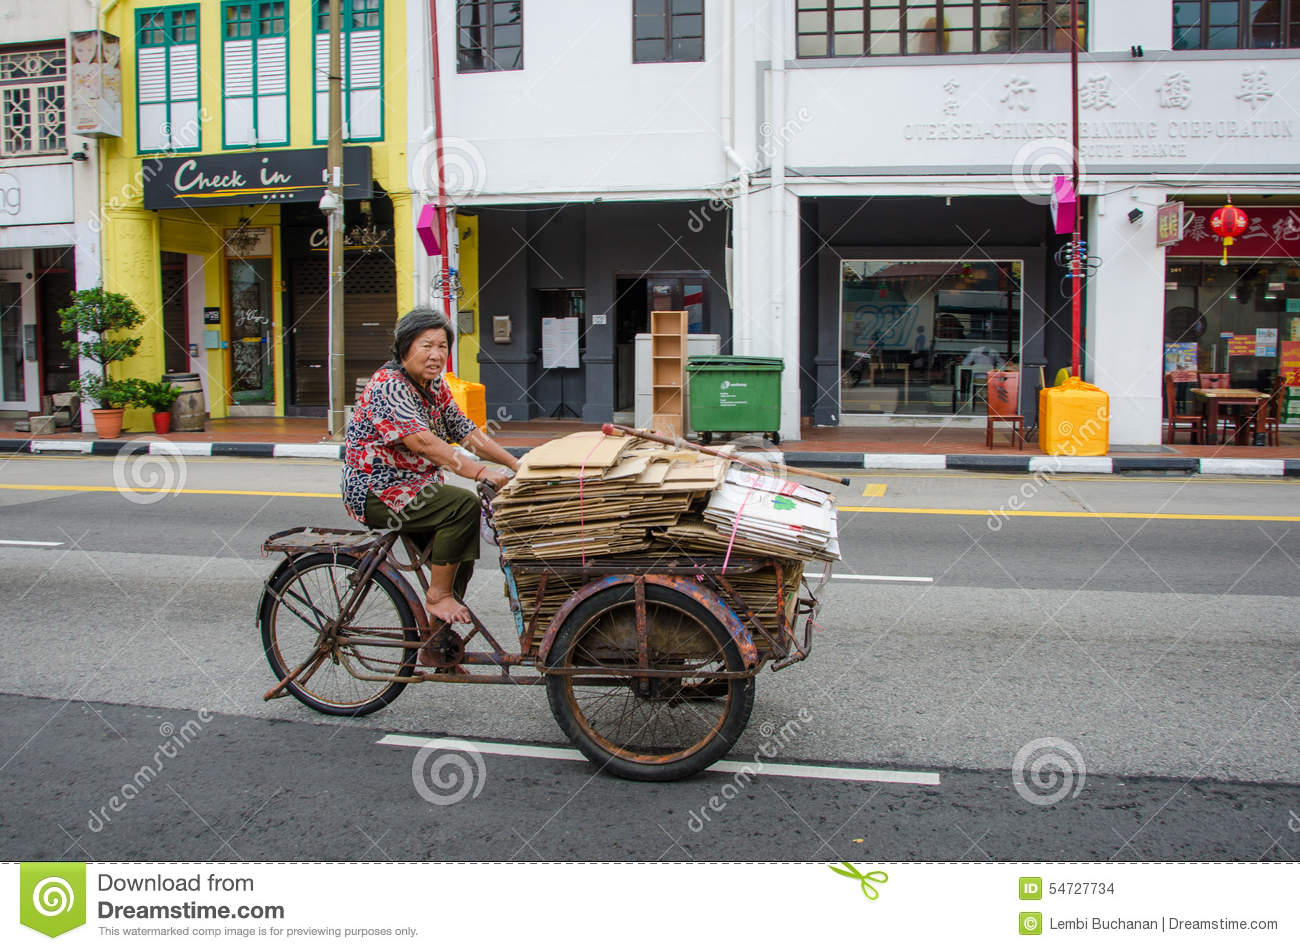 woman-bare-feet-transports-goods-old-rusted-tricycle-singapore-february-folded-used-cardboard-...jpg